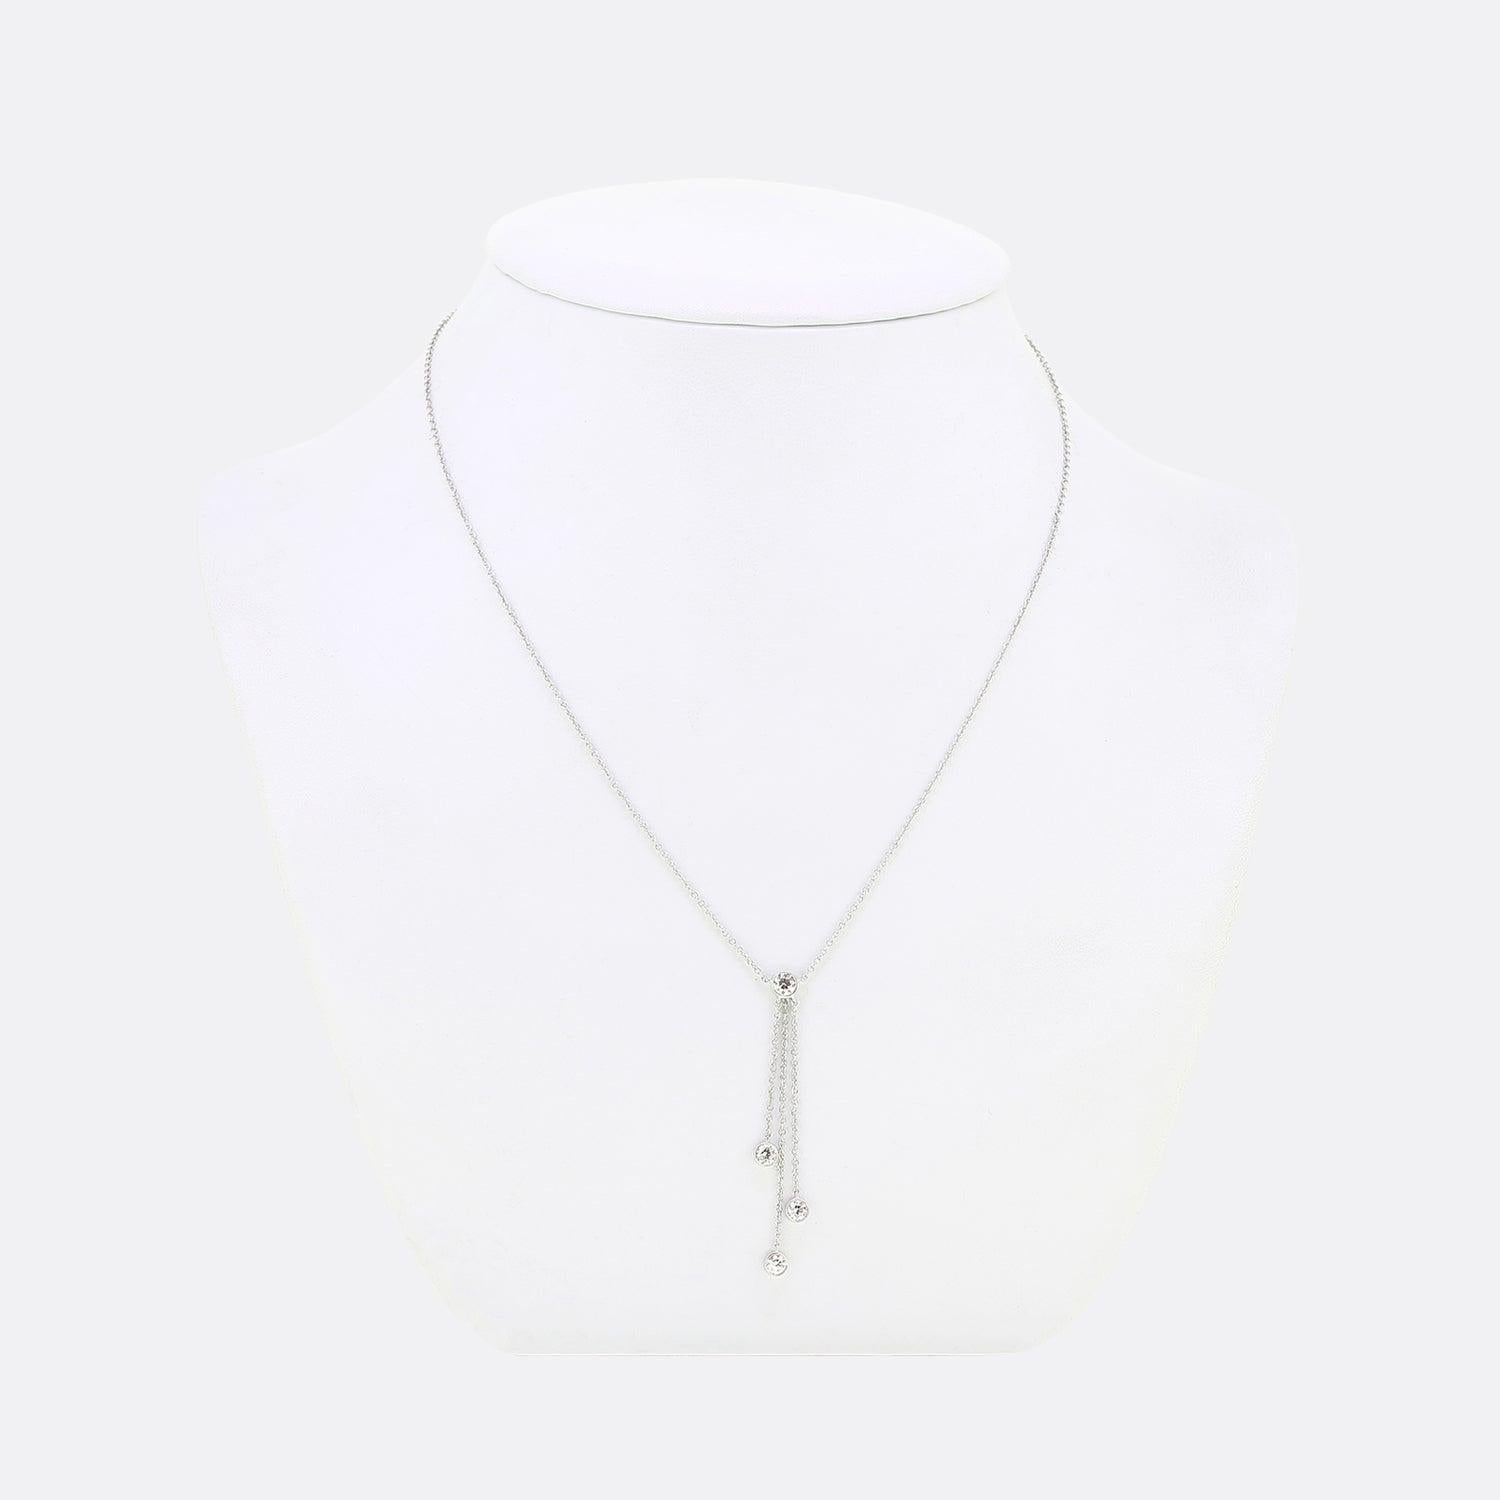 Here we have a beautiful platinum diamond necklace from the world renowned luxury jewellery designer, Tiffany & Co. A 0.20ct round brilliant cut diamond sits at the centre of the piece with a trio of belcher chains suspending three slightly smaller